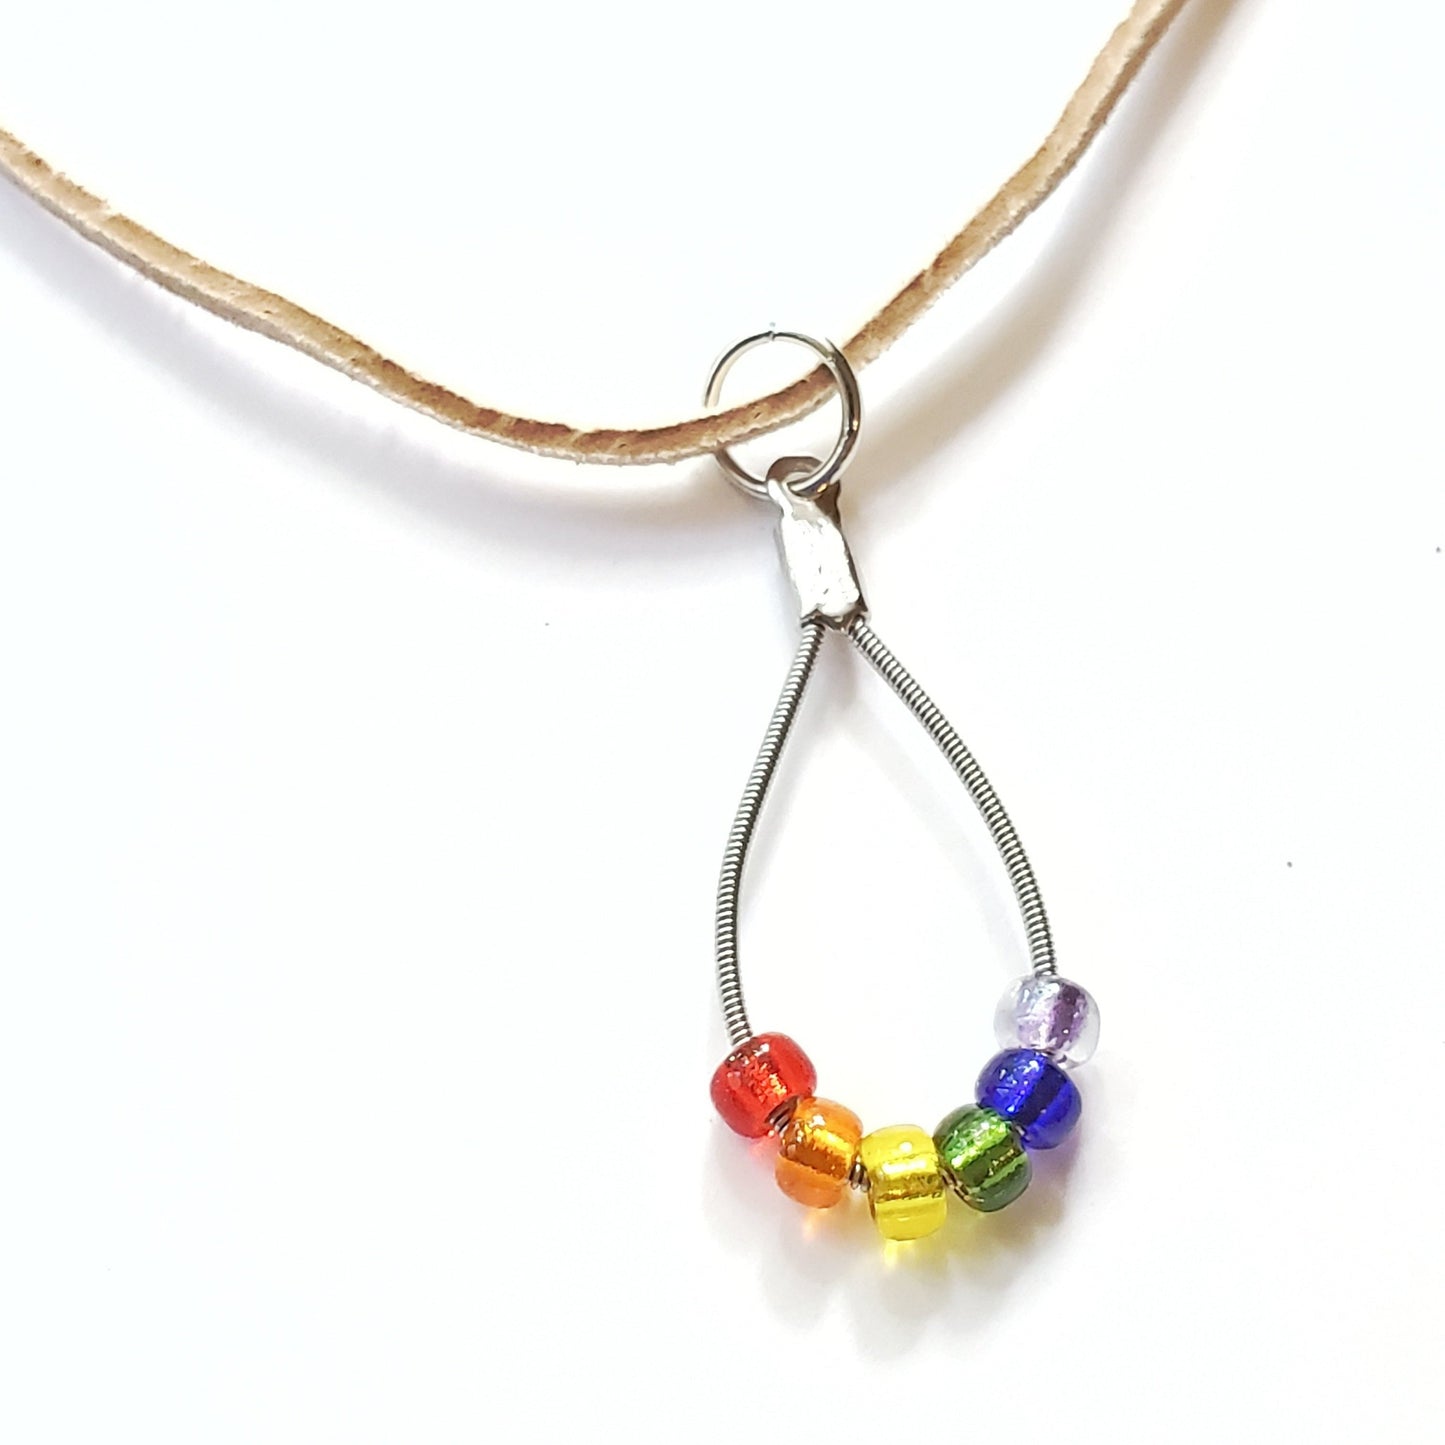 LGBTQ pride leather necklace with guitar string pendant